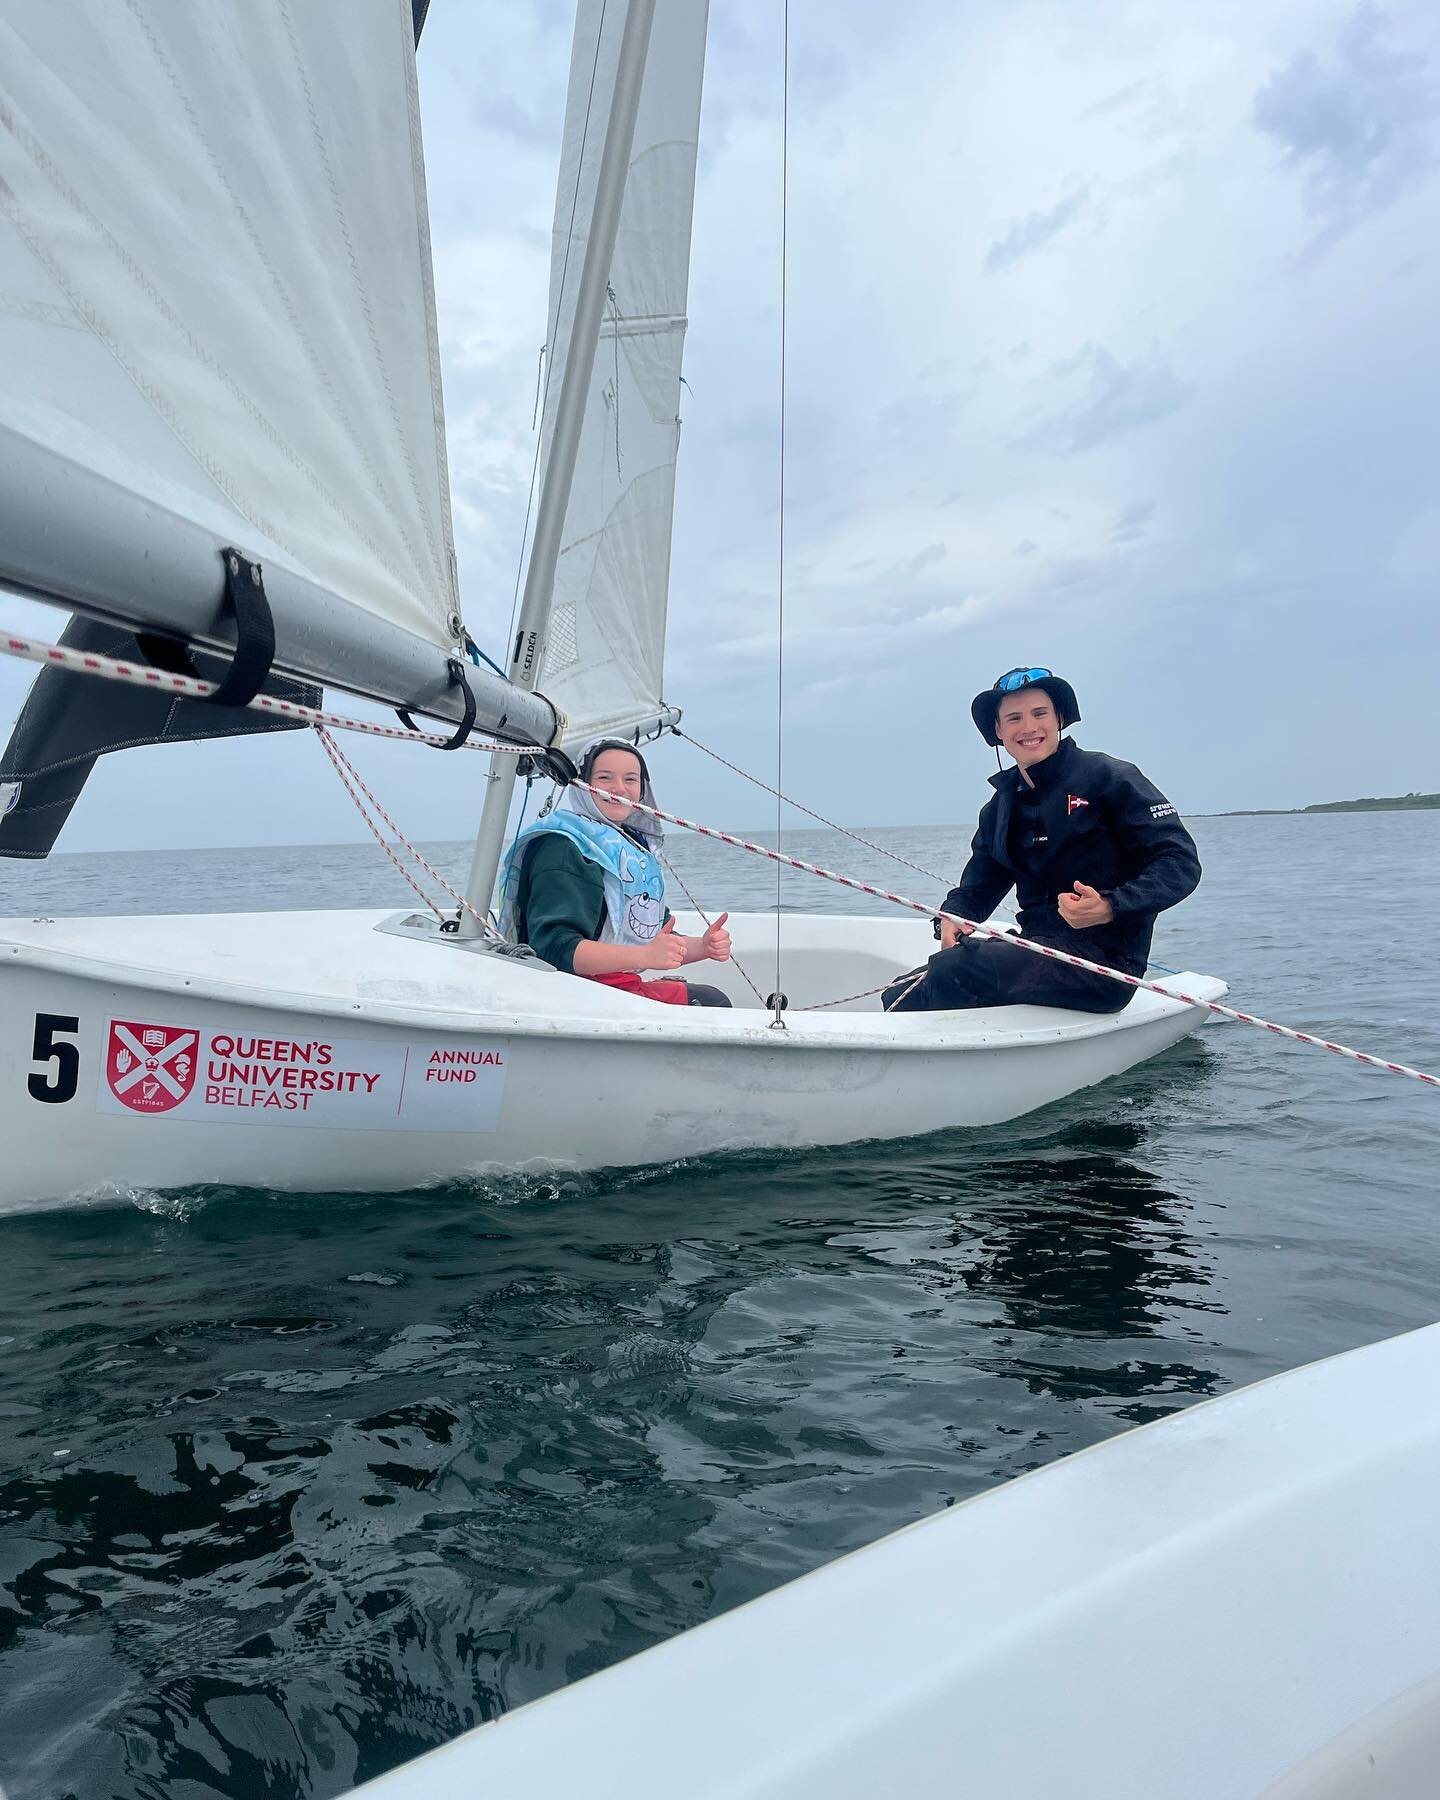 QUEENS UNIVERSITY BELFAST ALUMNI EVENT 2023 ❤️🤍❤️🤍

This weekend Trinity Sailing sent a team north to compete in the @qubsailingclub alumni event, in Ballyholme Bay, Co Down&hellip;

Even after the college year has ended at Trinity it was lovely to